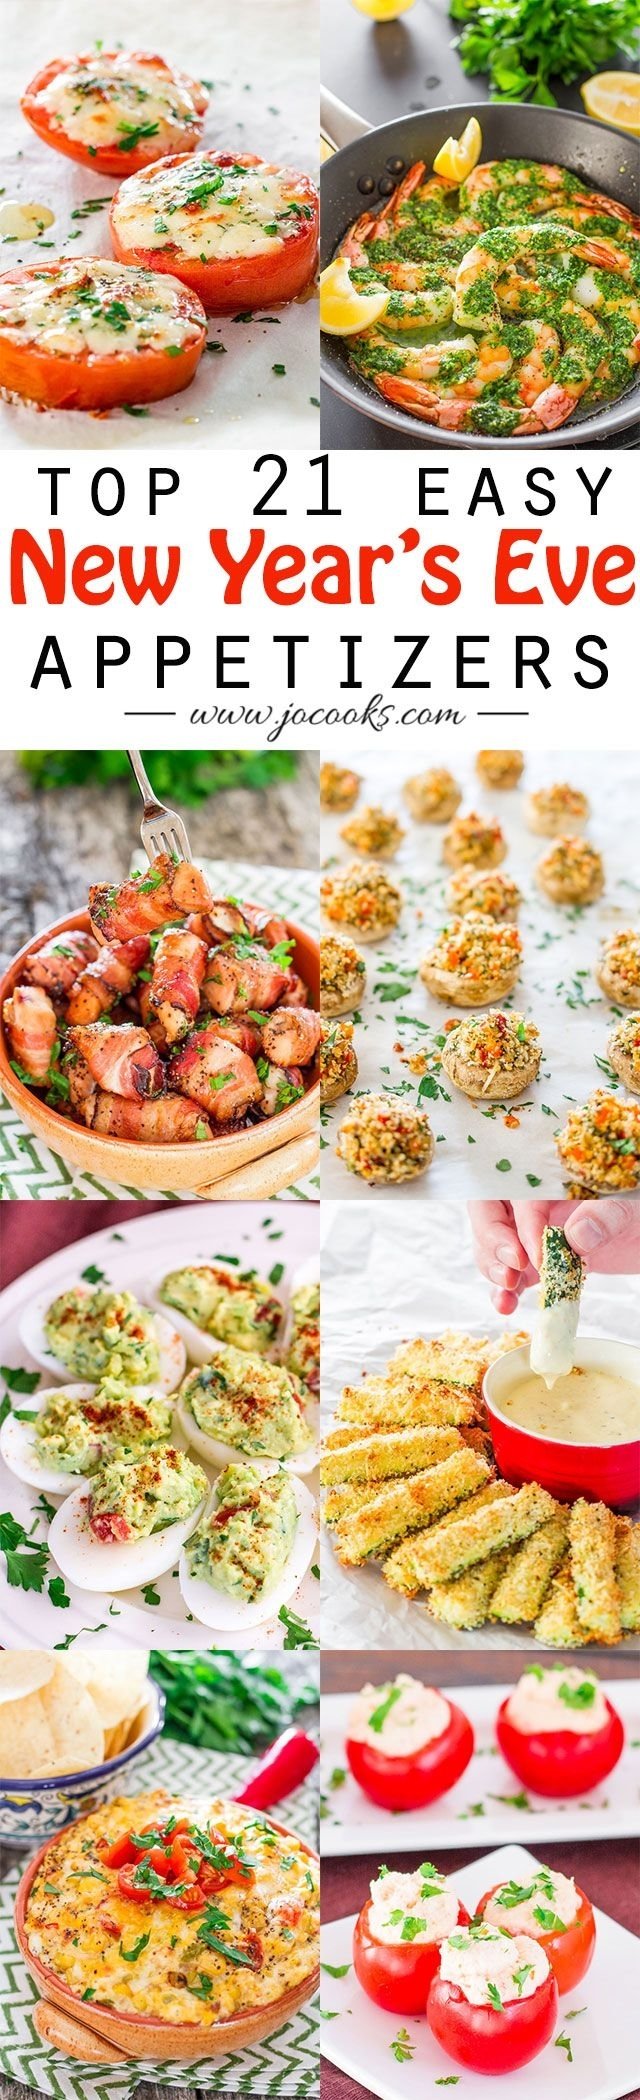 10 Fantastic New Years Eve Dinner Party Ideas 314 best new years ideas images on pinterest new years eve free 8 2022